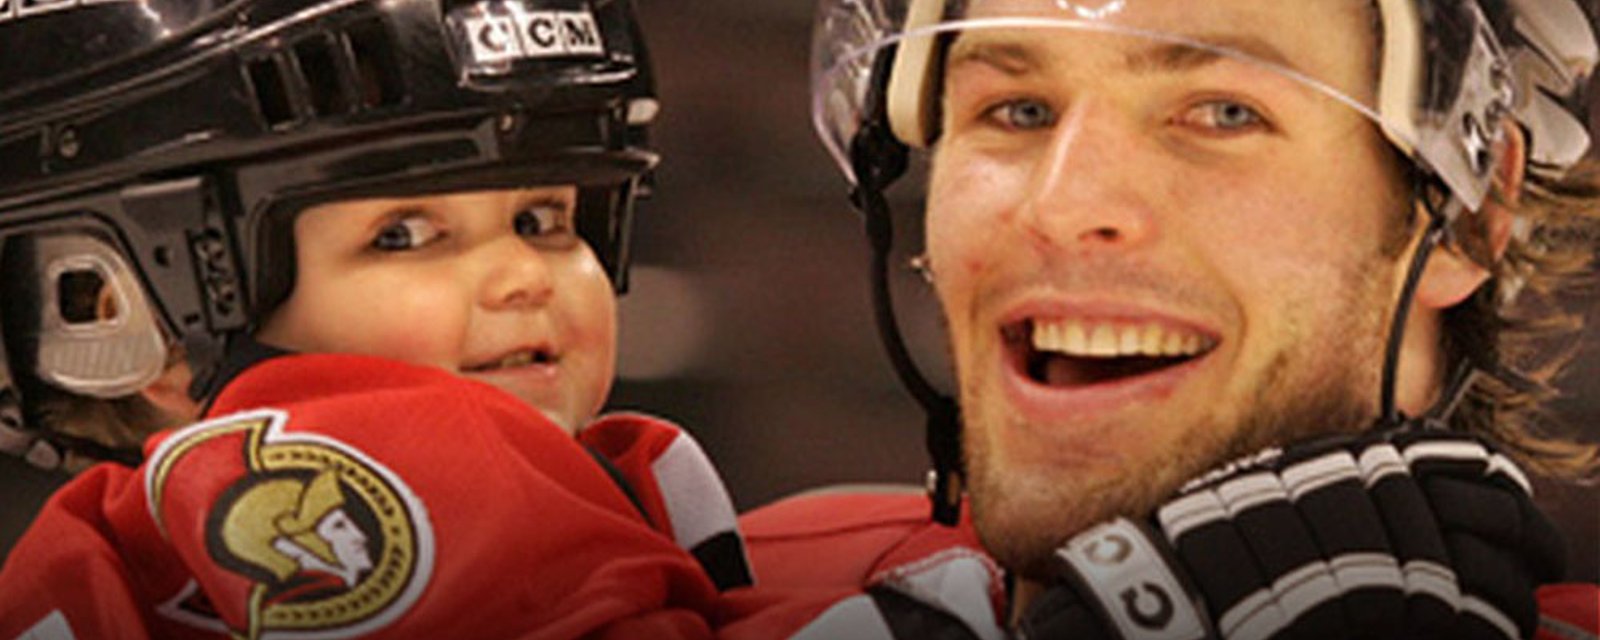 Mike Fisher: A true hero to one very special fan